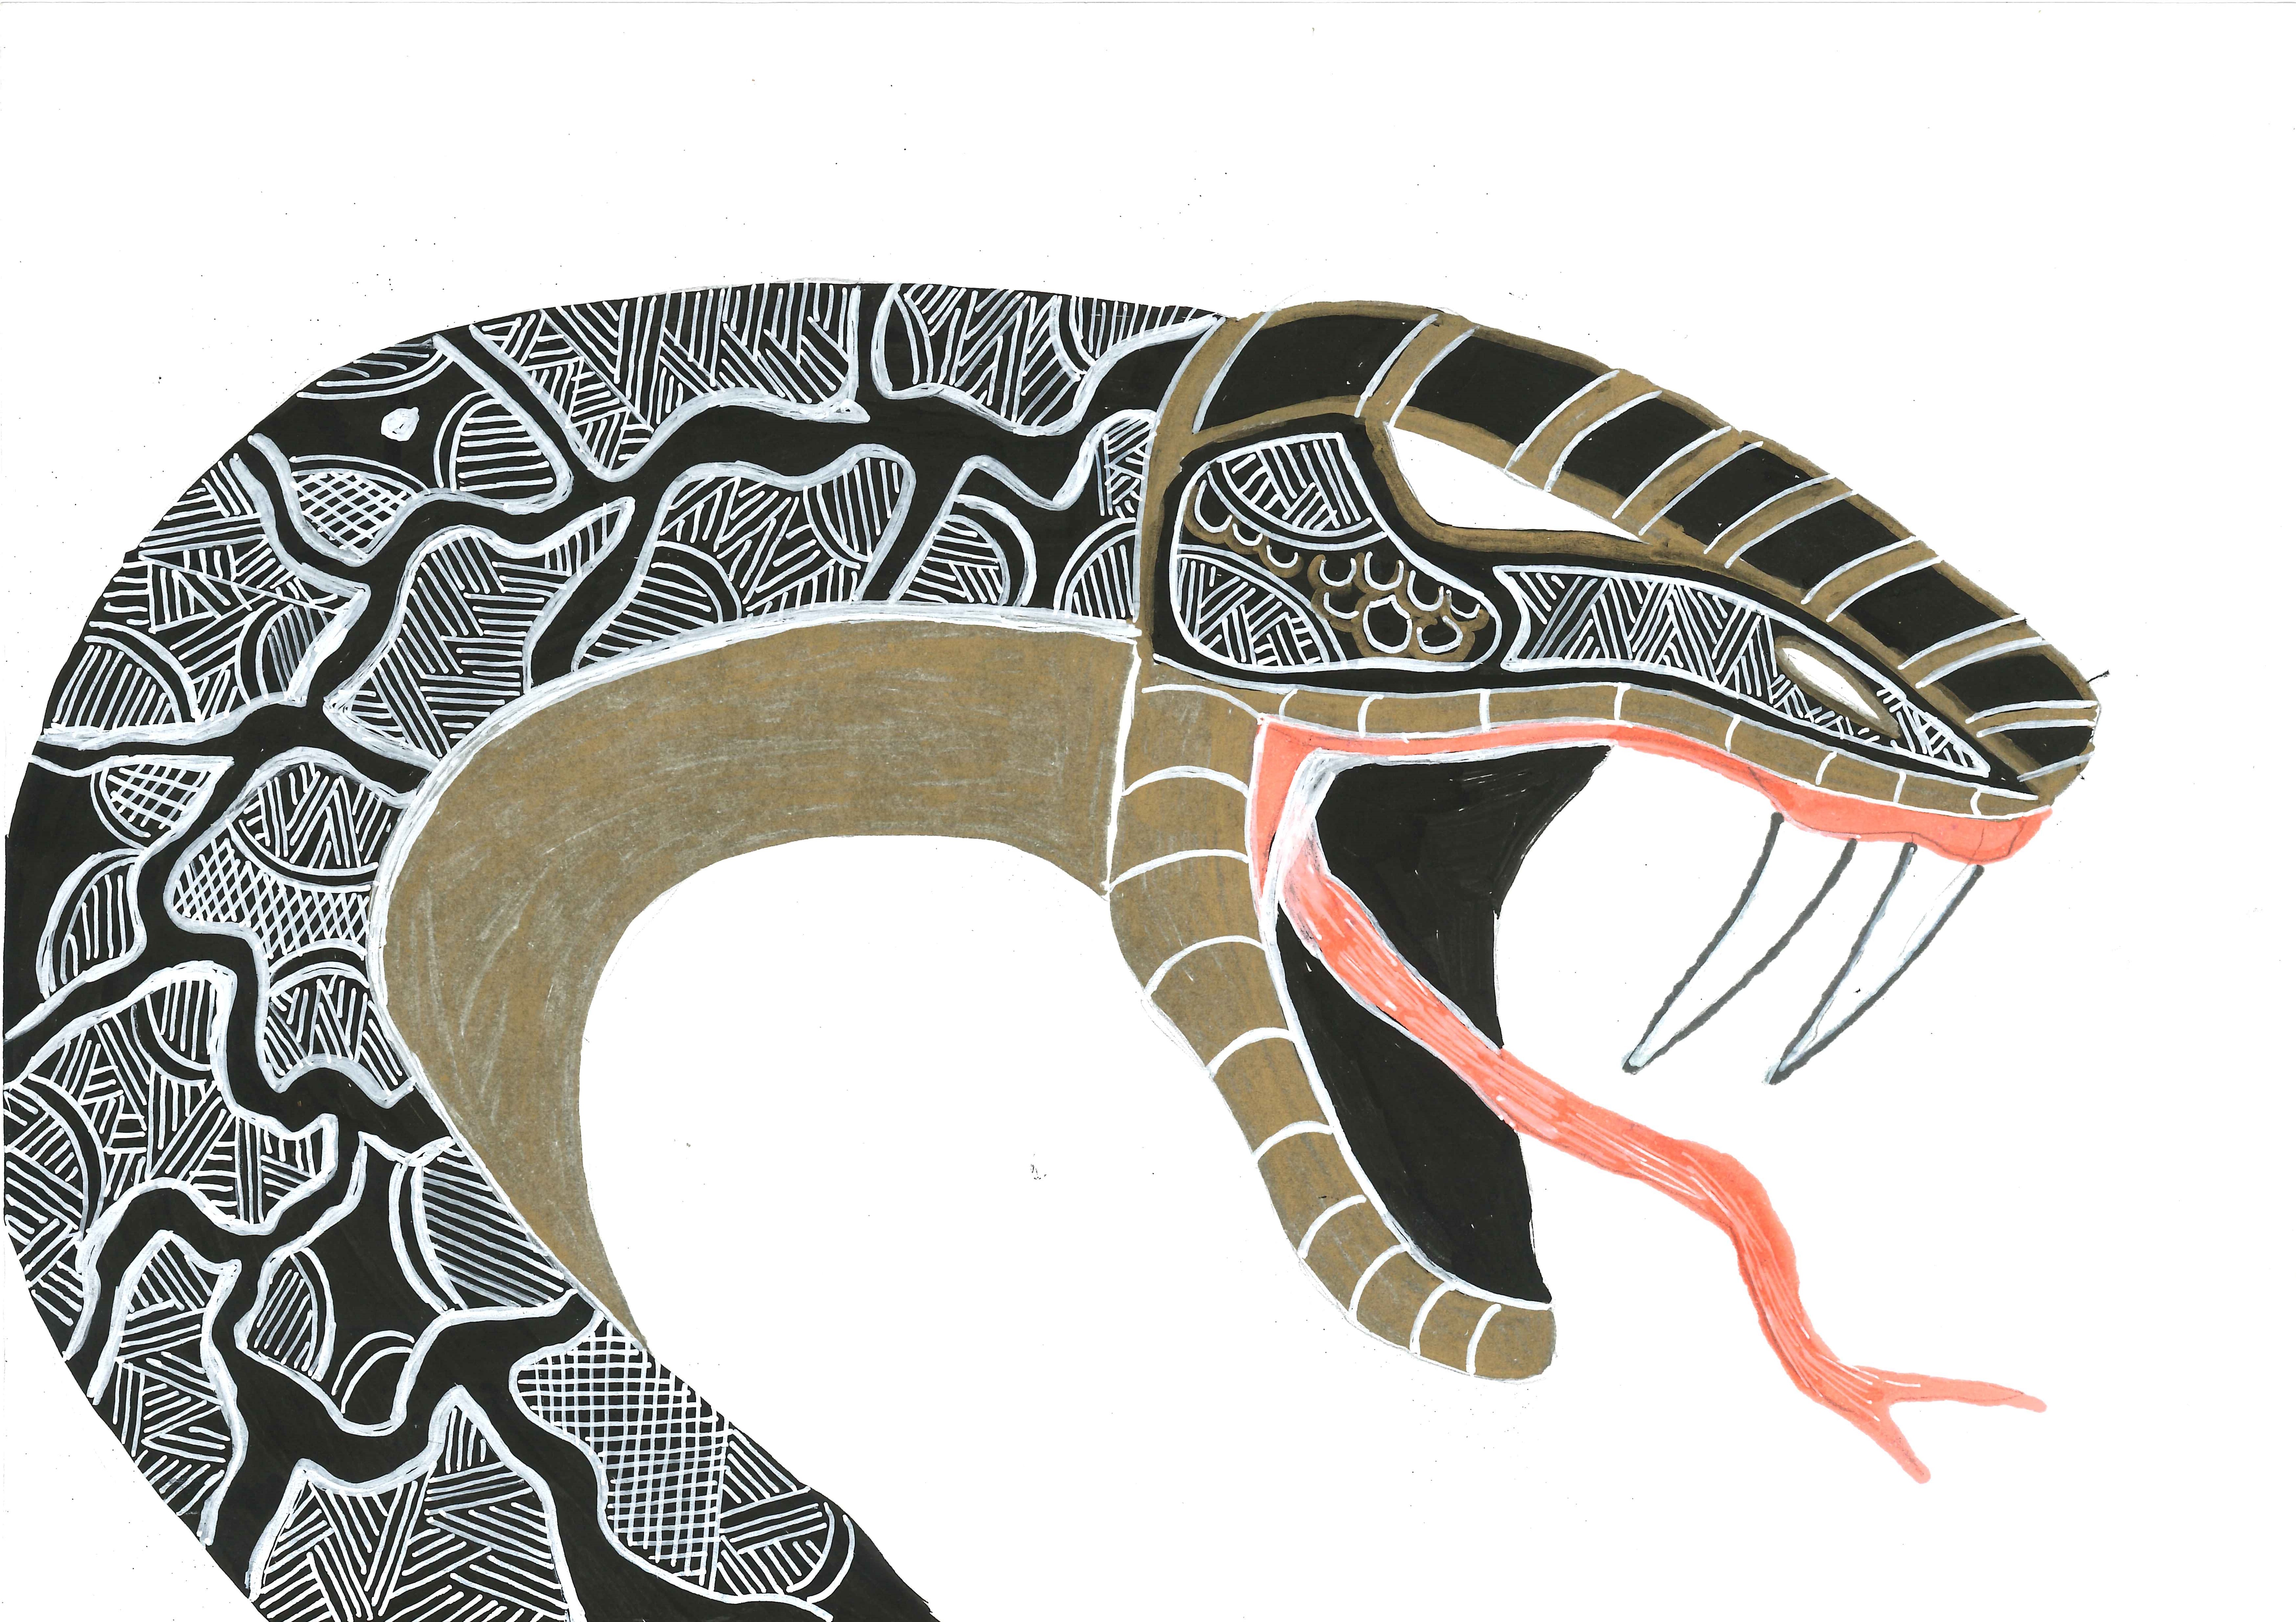 Graphic black, white, gold and orange drawing of a serpent with mouth open and fangs bared